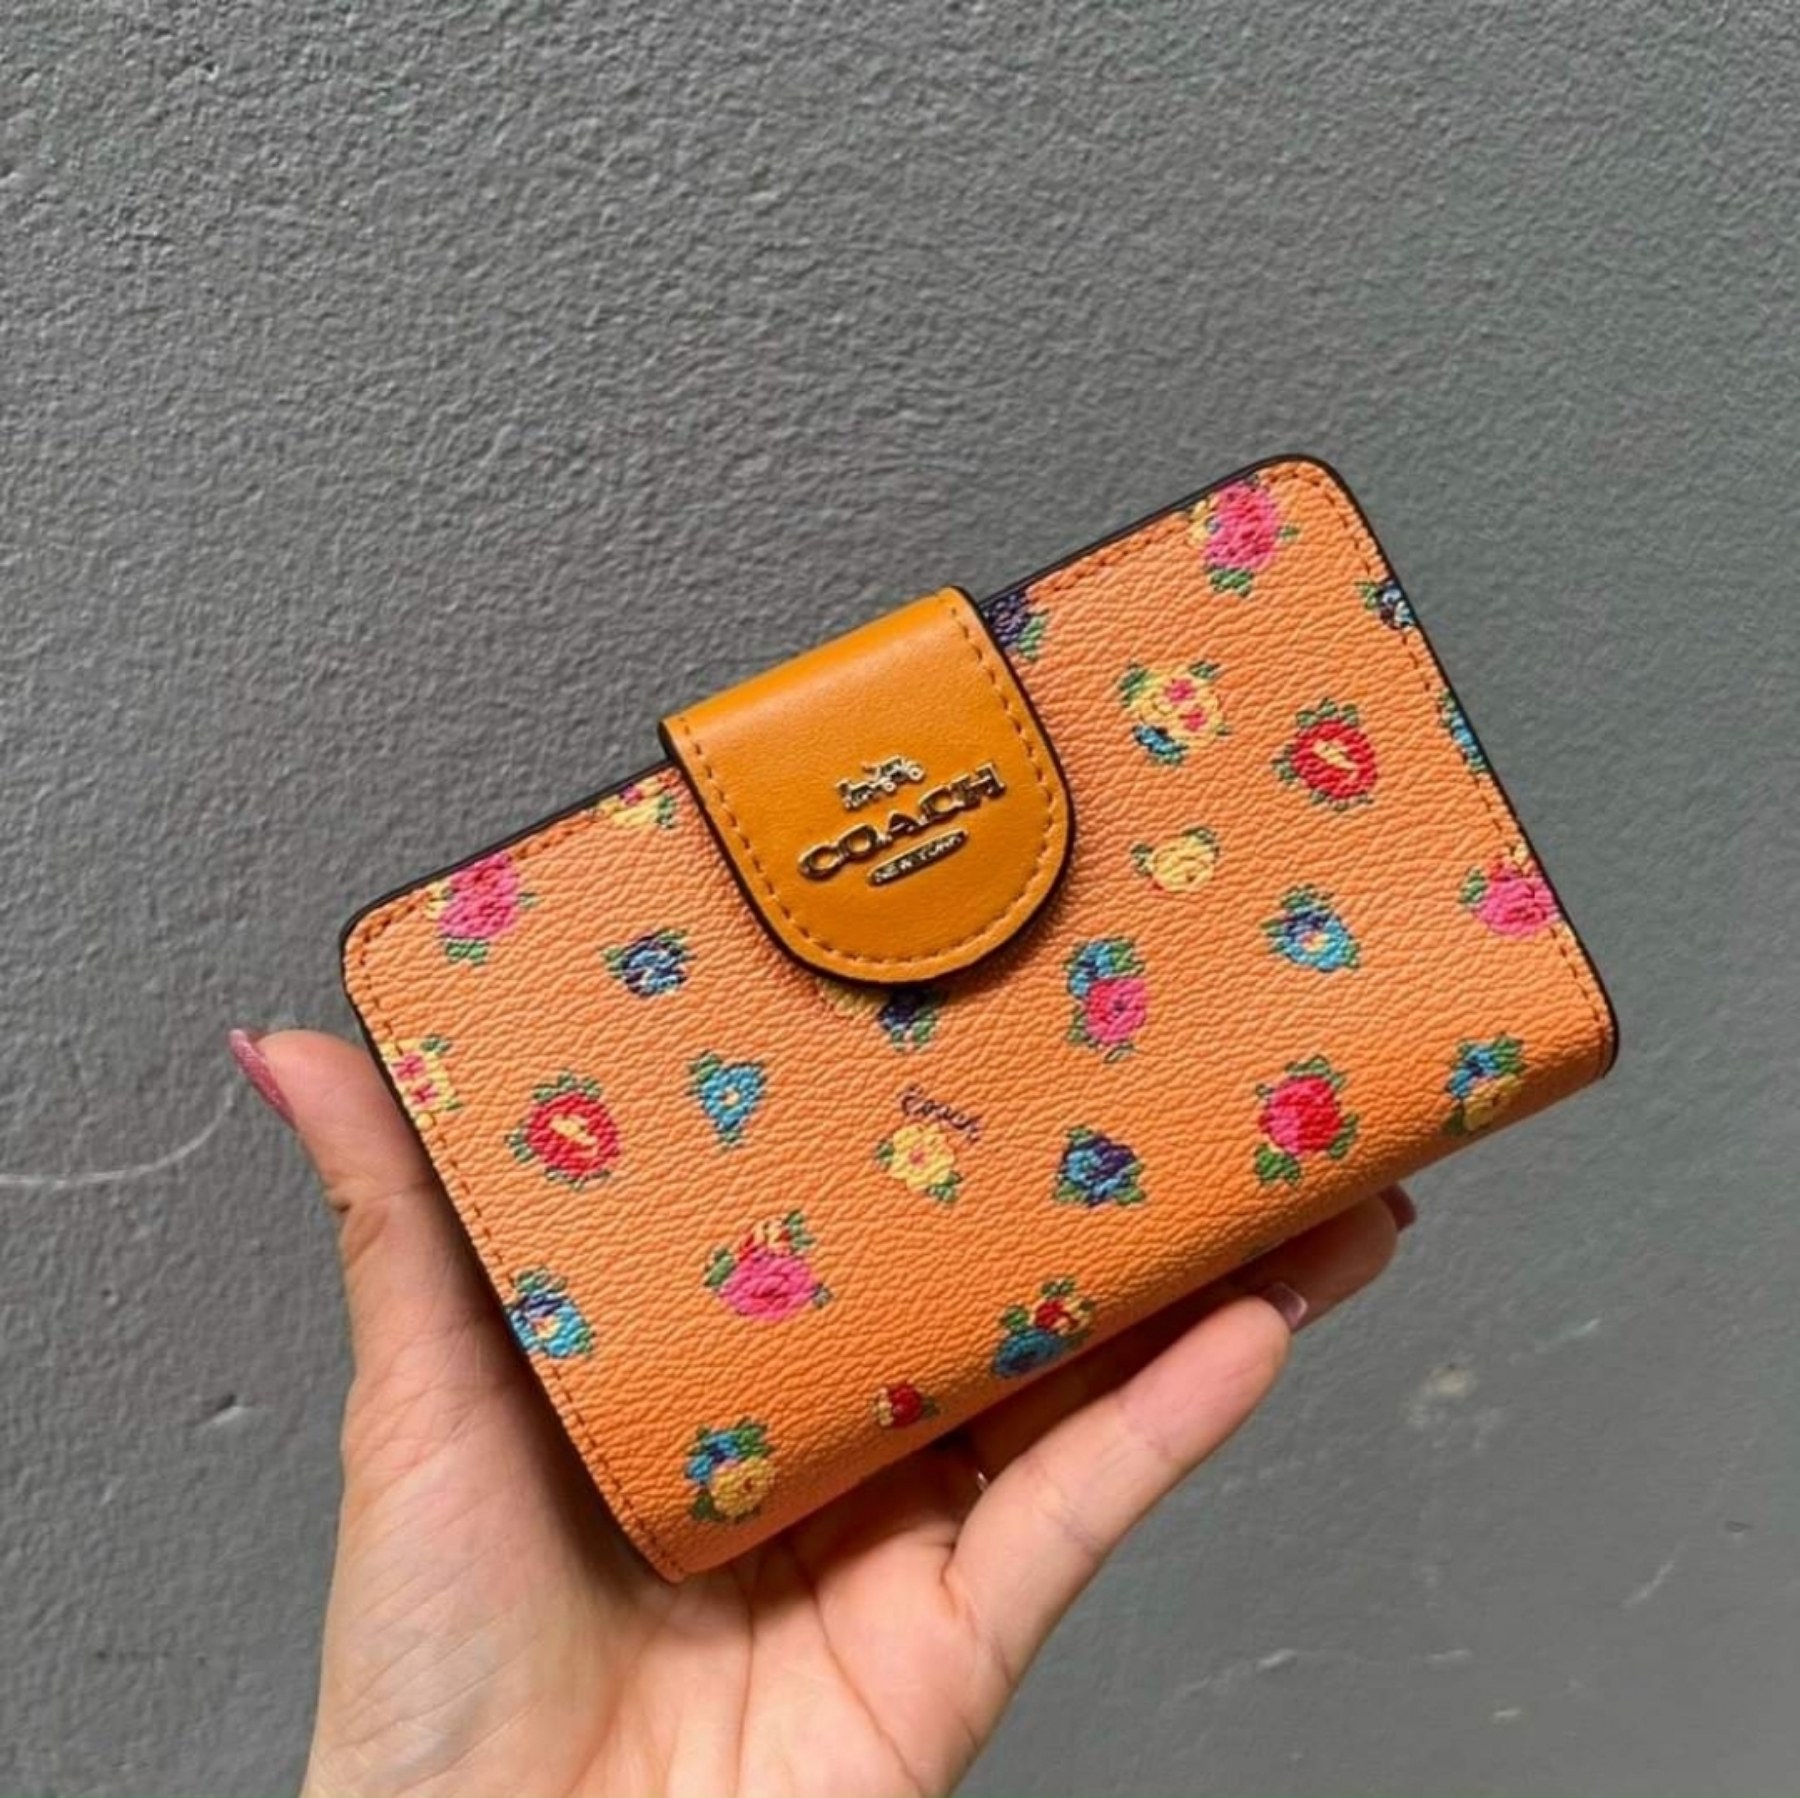 Coach C9934 Medium Corner Zip Wallet in Light Orange Printed Coated Canvas  with Mini Vintage Rose Print and Smooth Leather - Women's Wallet | Lazada PH